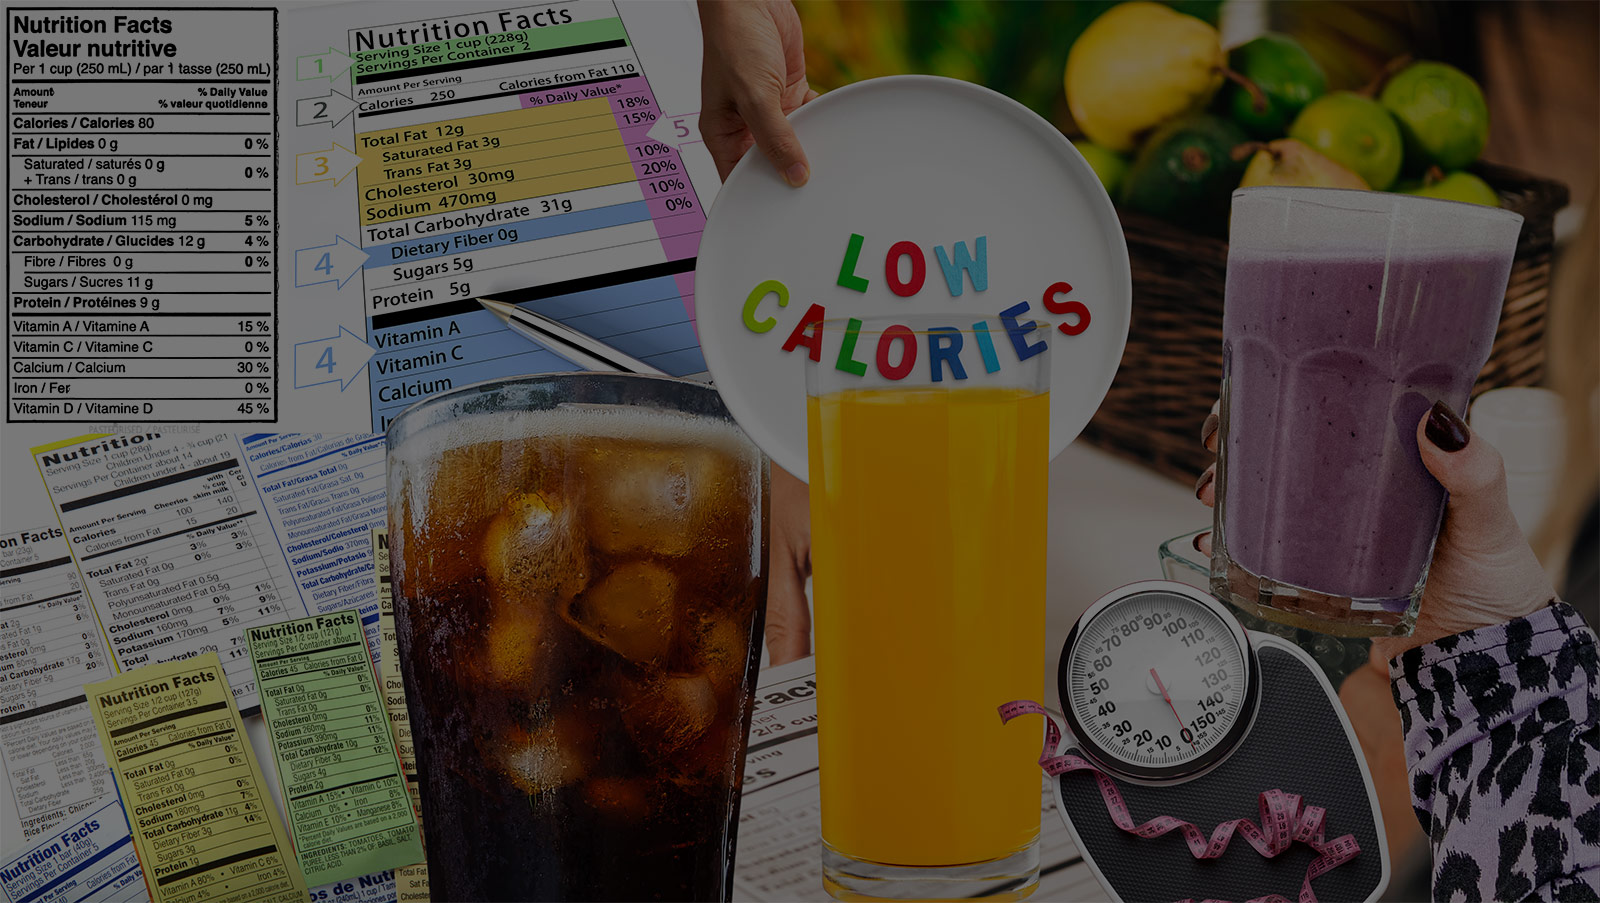 breaking-down-low-calorie-drink-myths-whats-really-in-your-glass